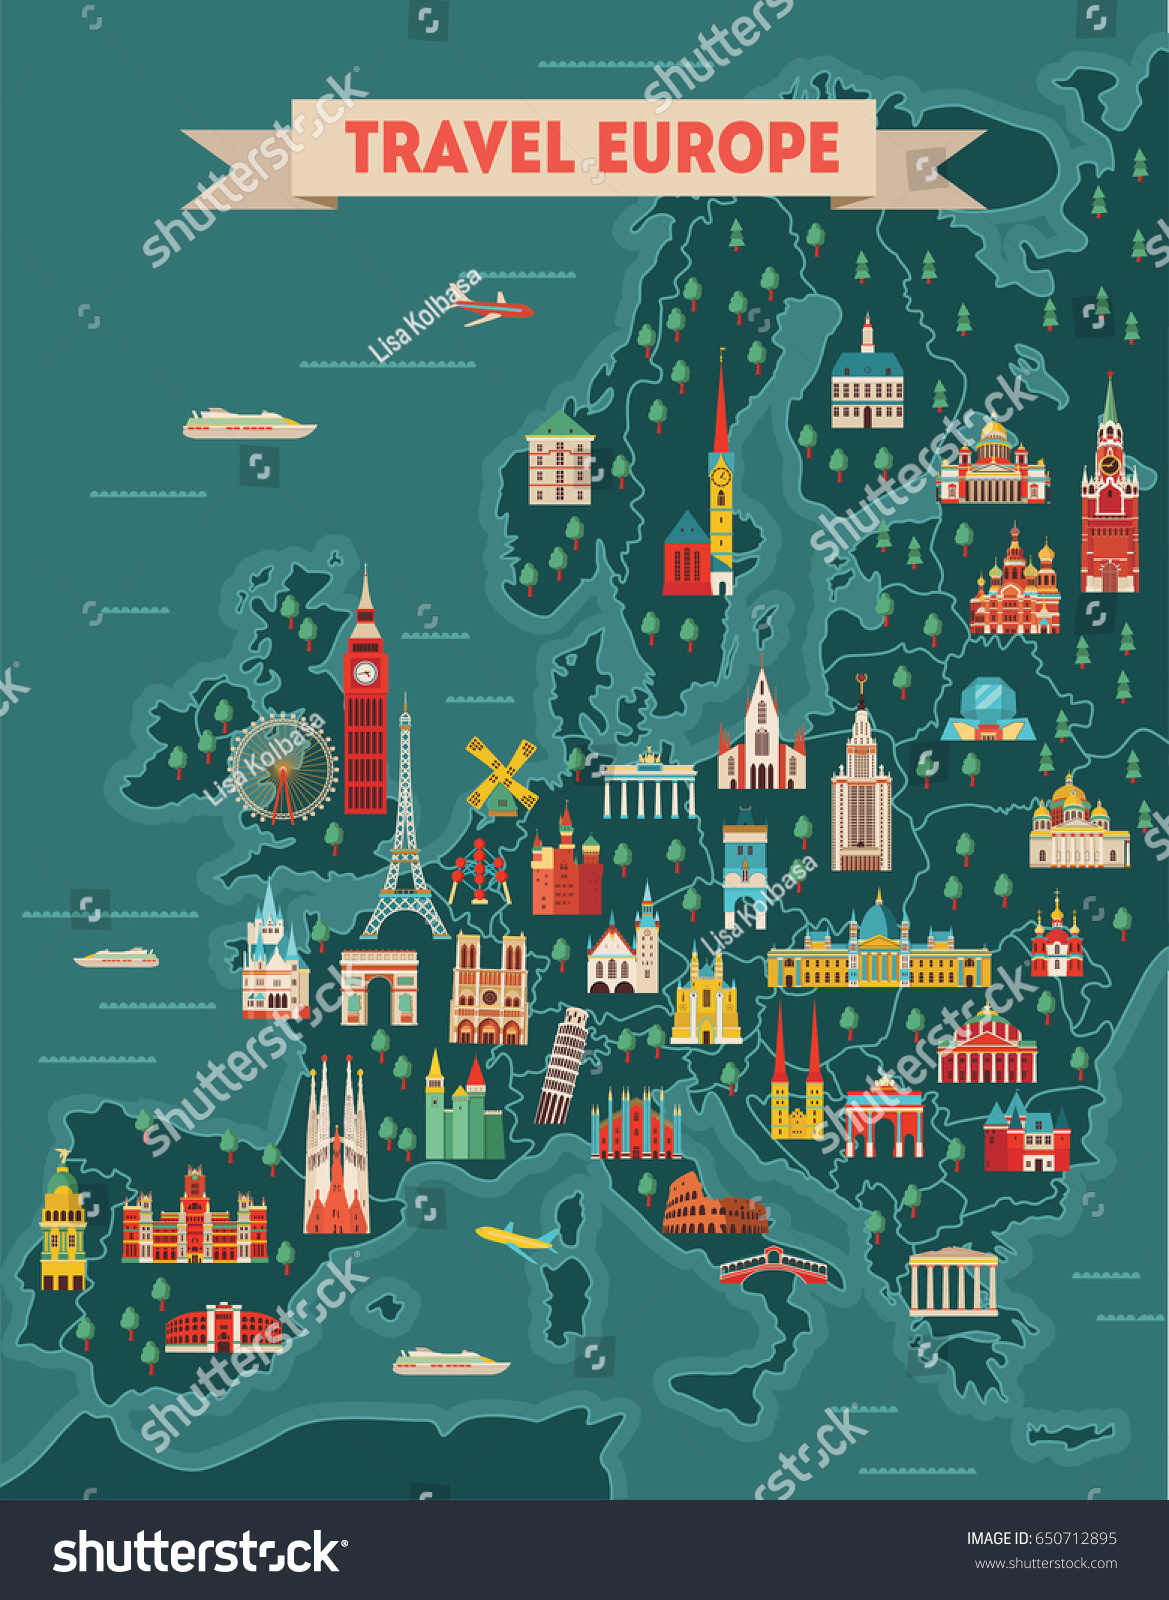 Europe Travel Map Poster Travel Tourism Stock Vector 650712895 - Shutterstock